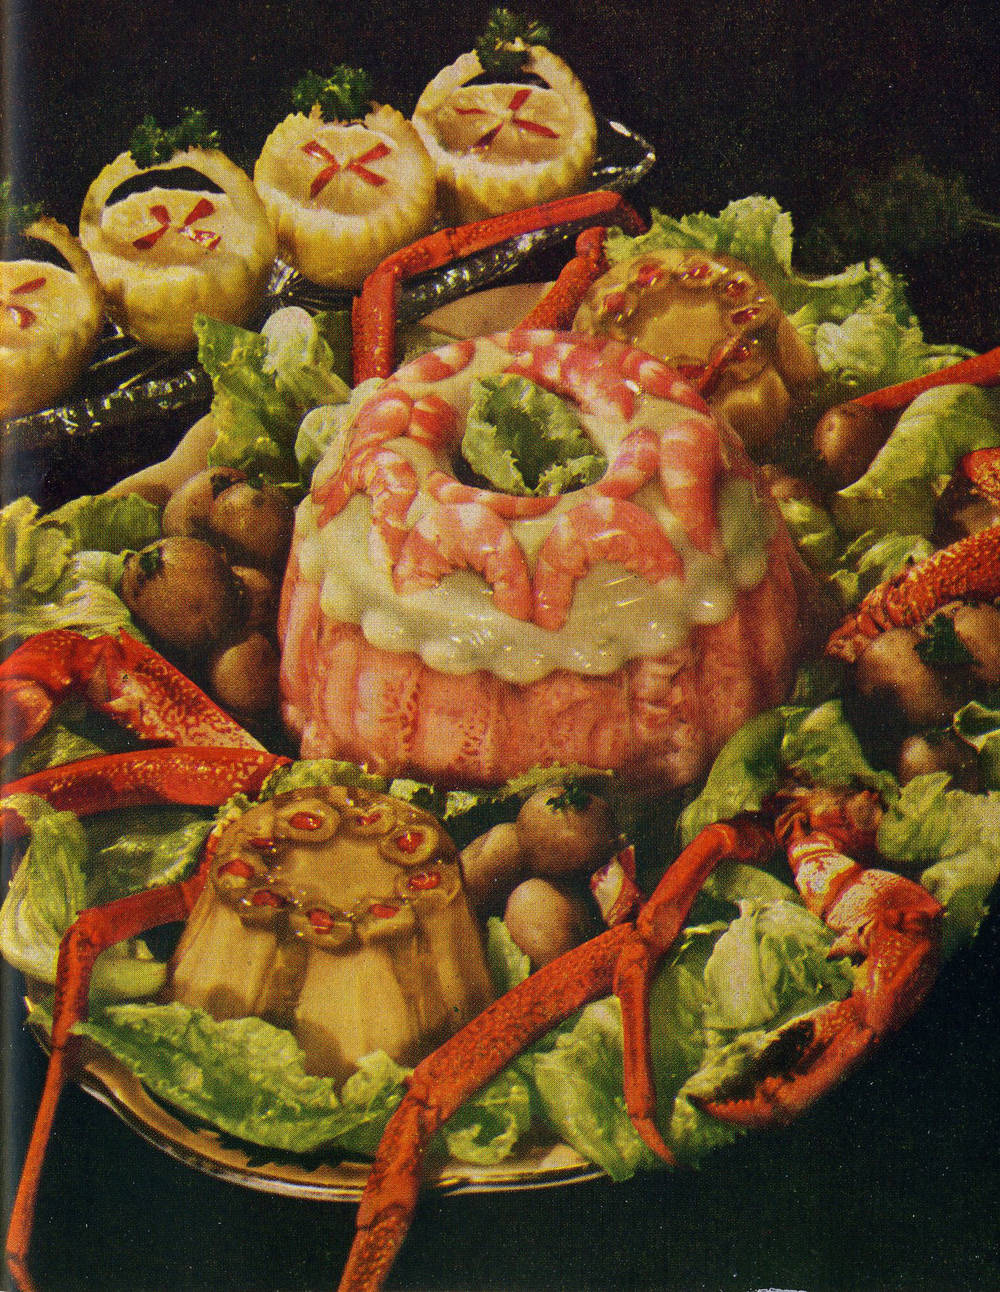 21 Truly Upsetting Vintage Recipes